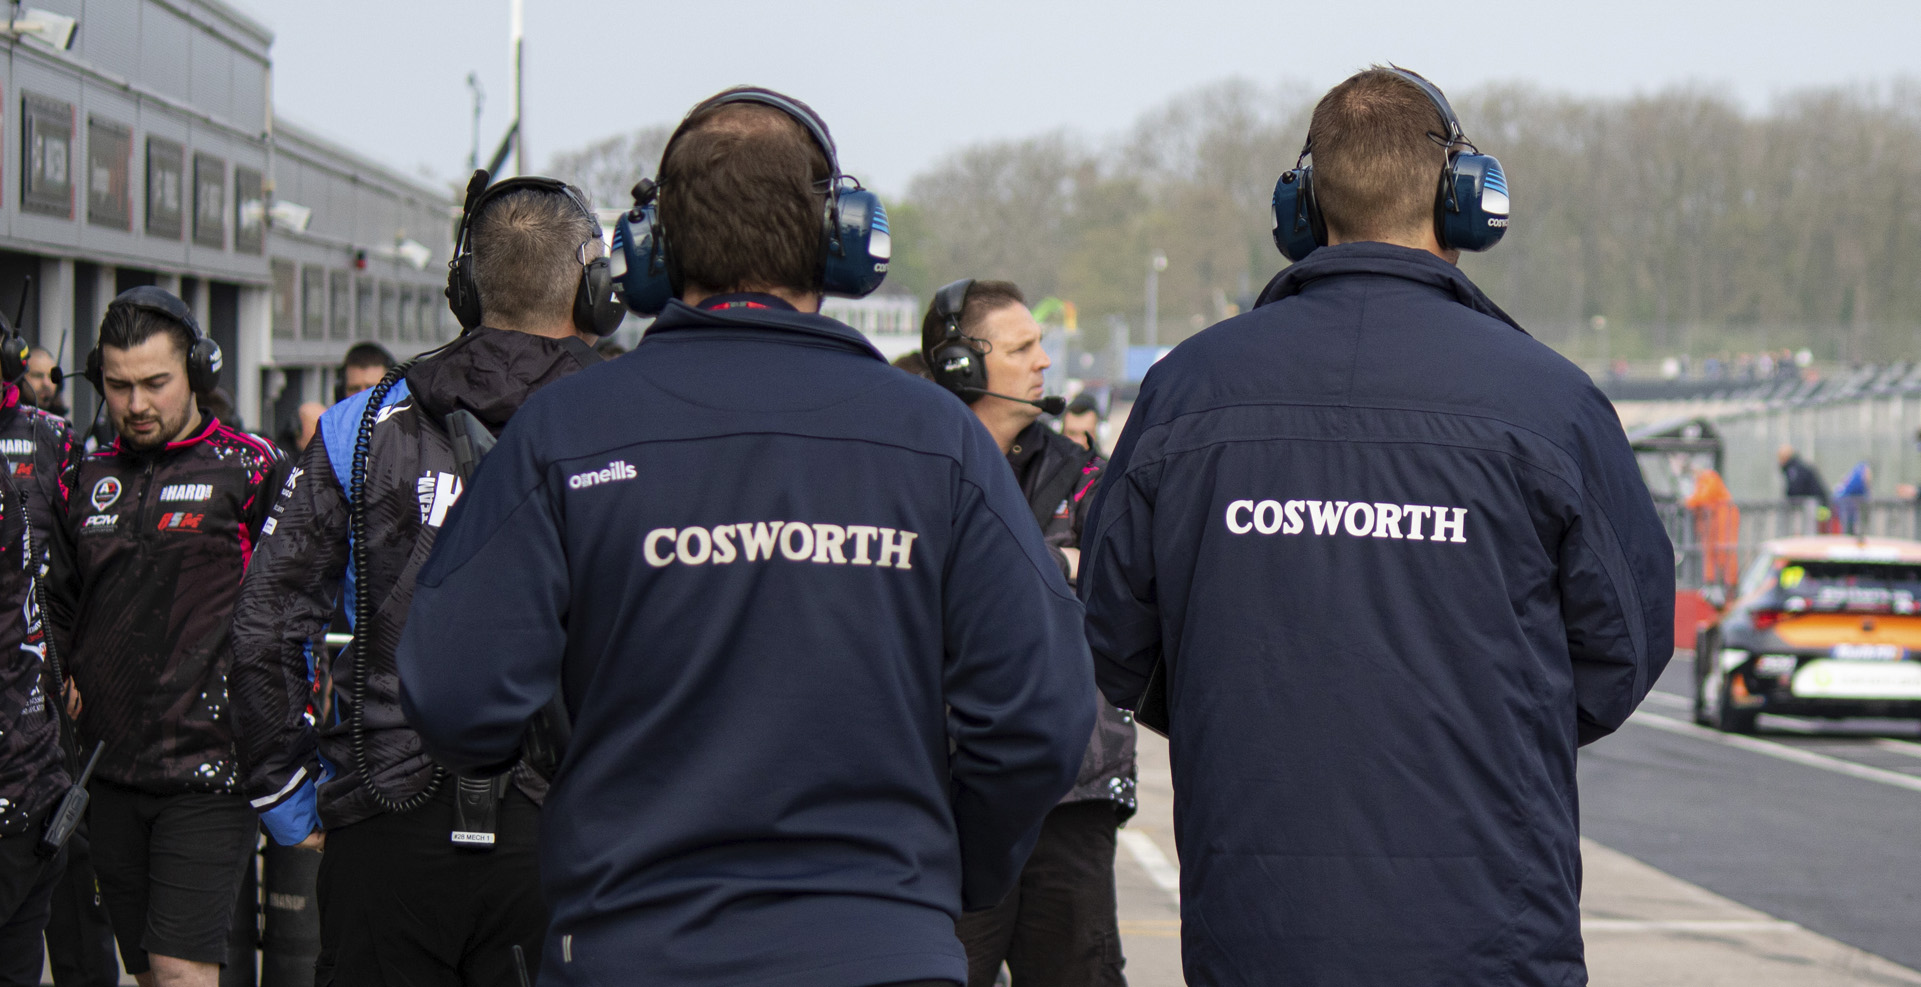 News from Cosworth